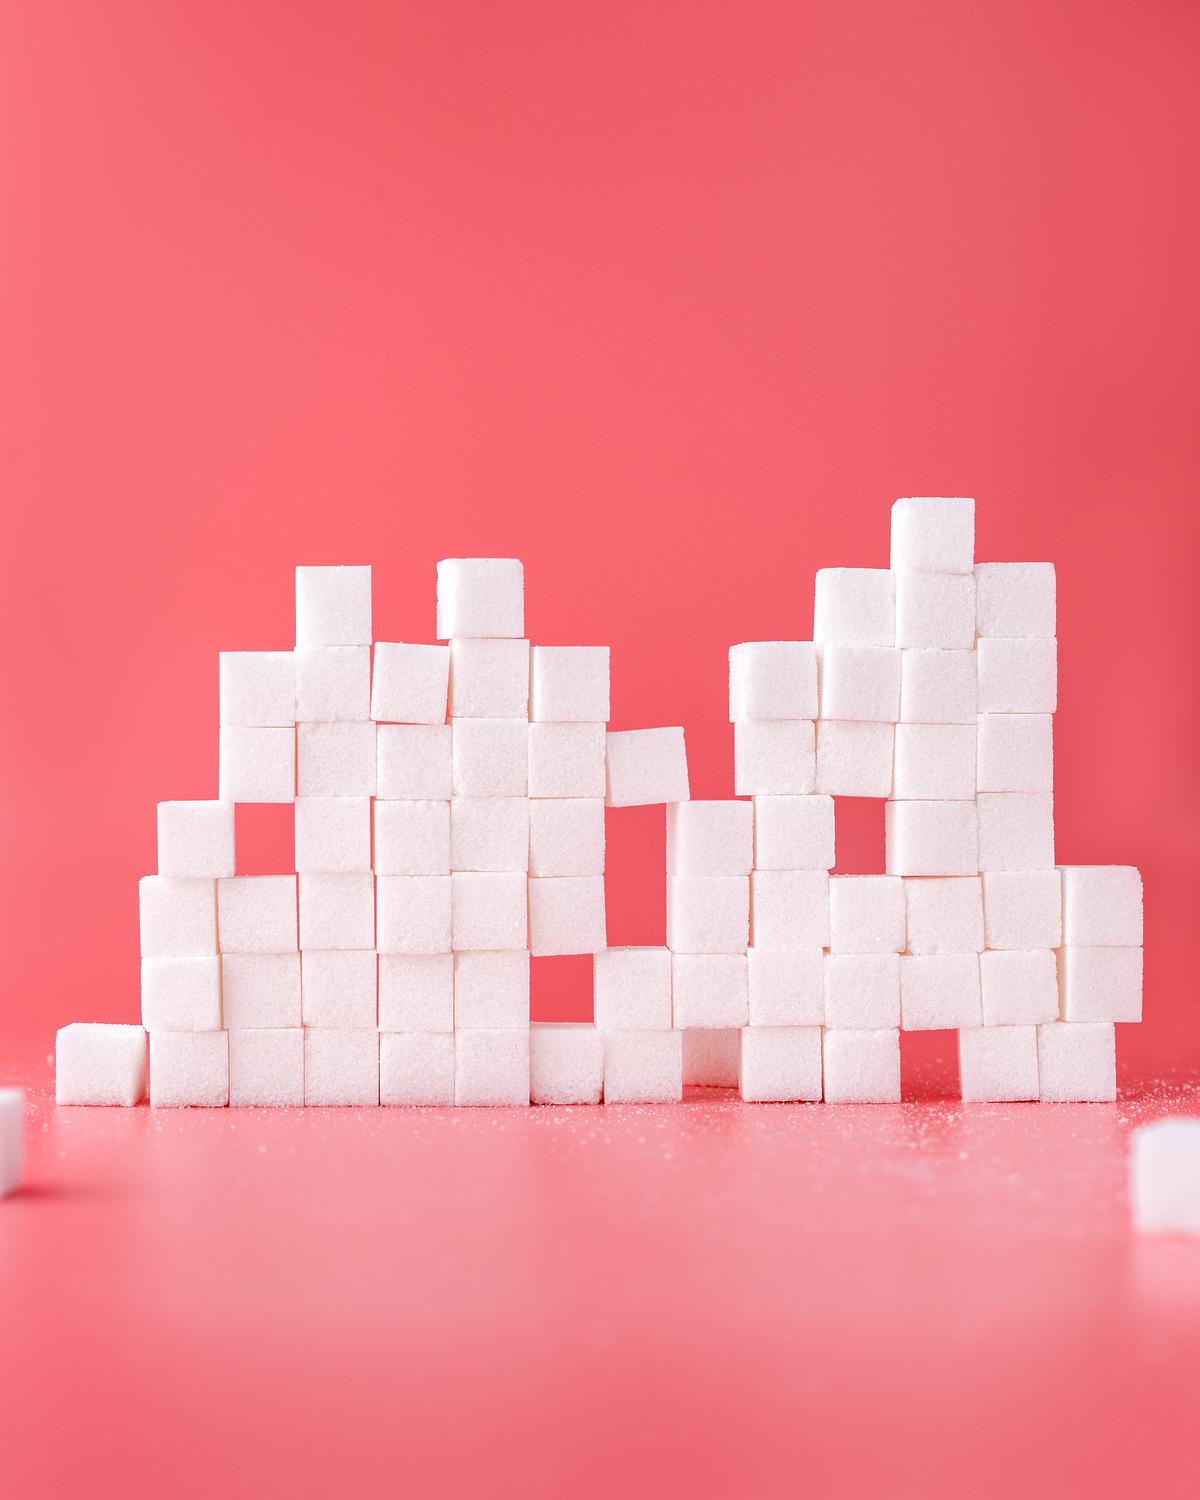 Illustration depicting the connection between sugar and weight gain in children